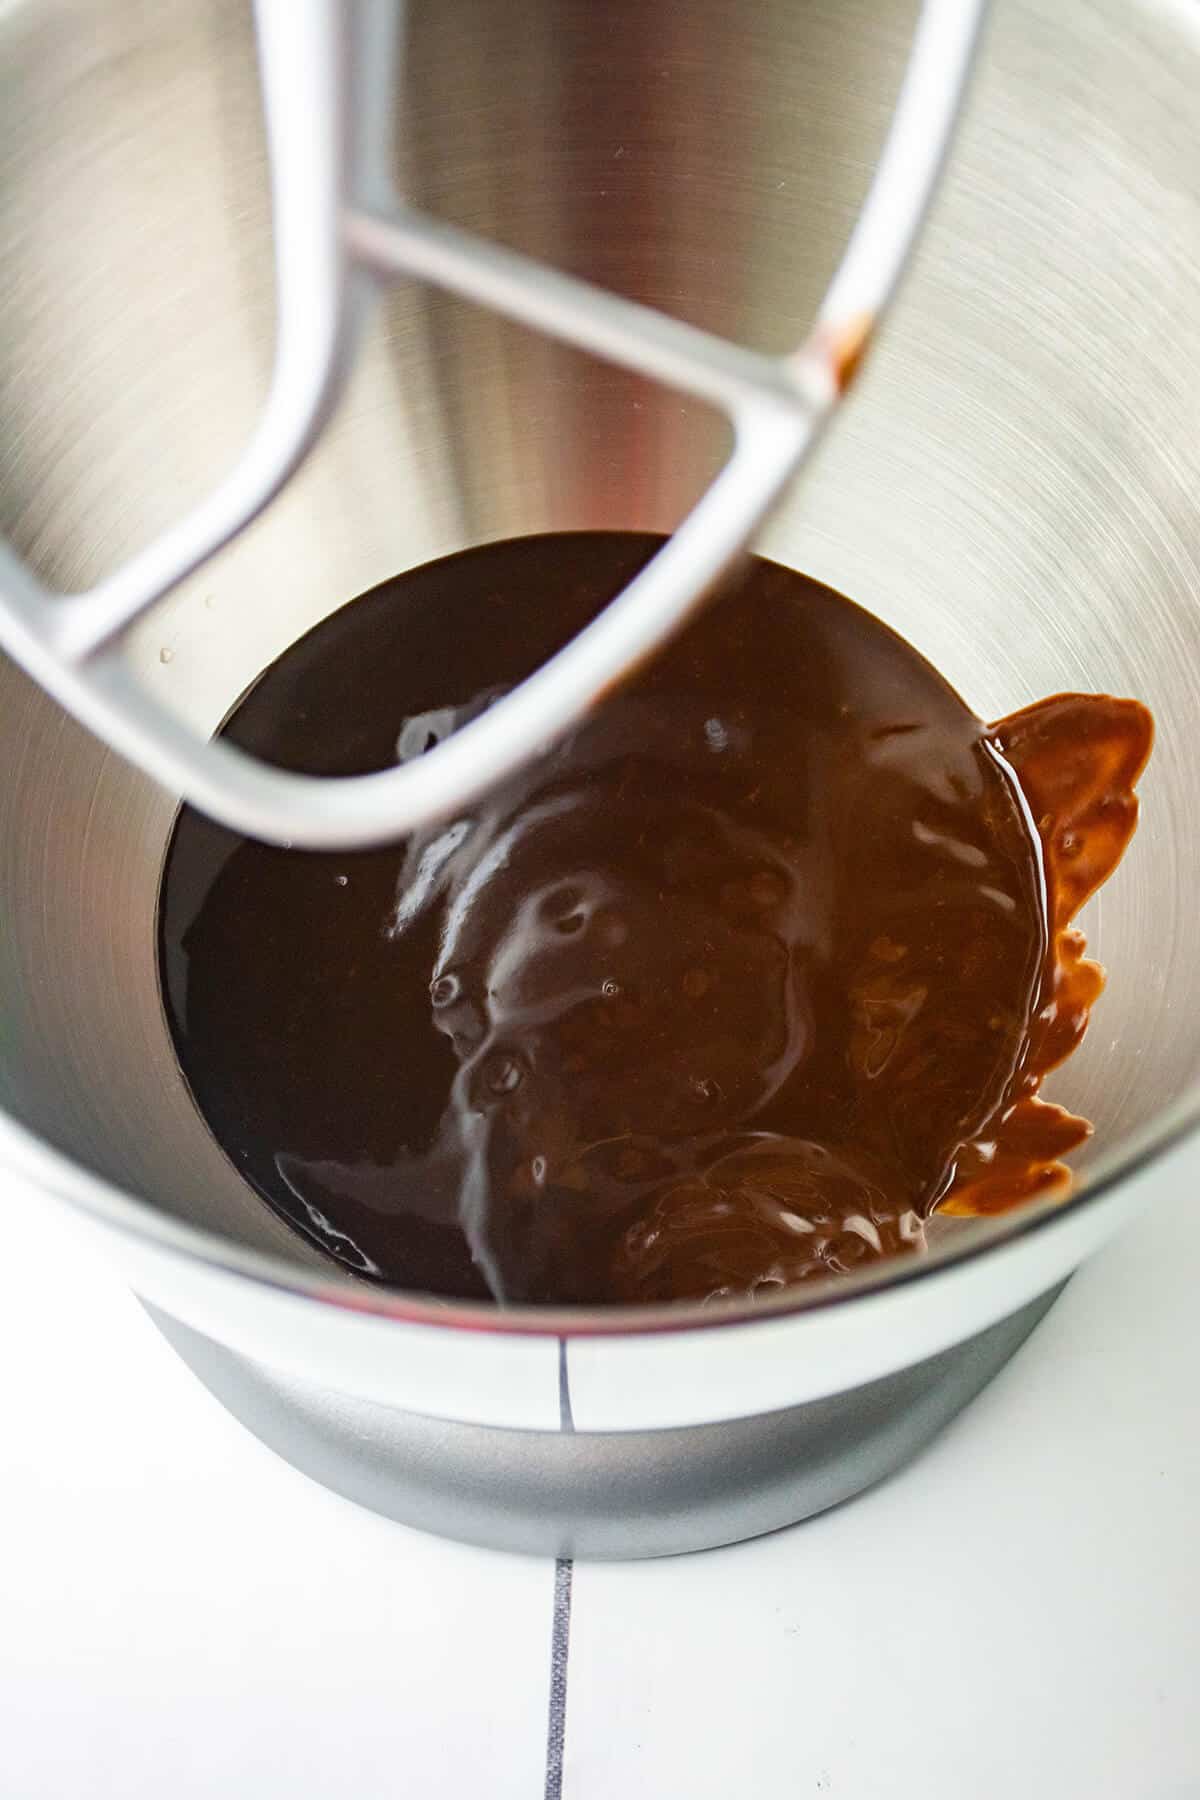 Melted chocolate in mixing bowl.